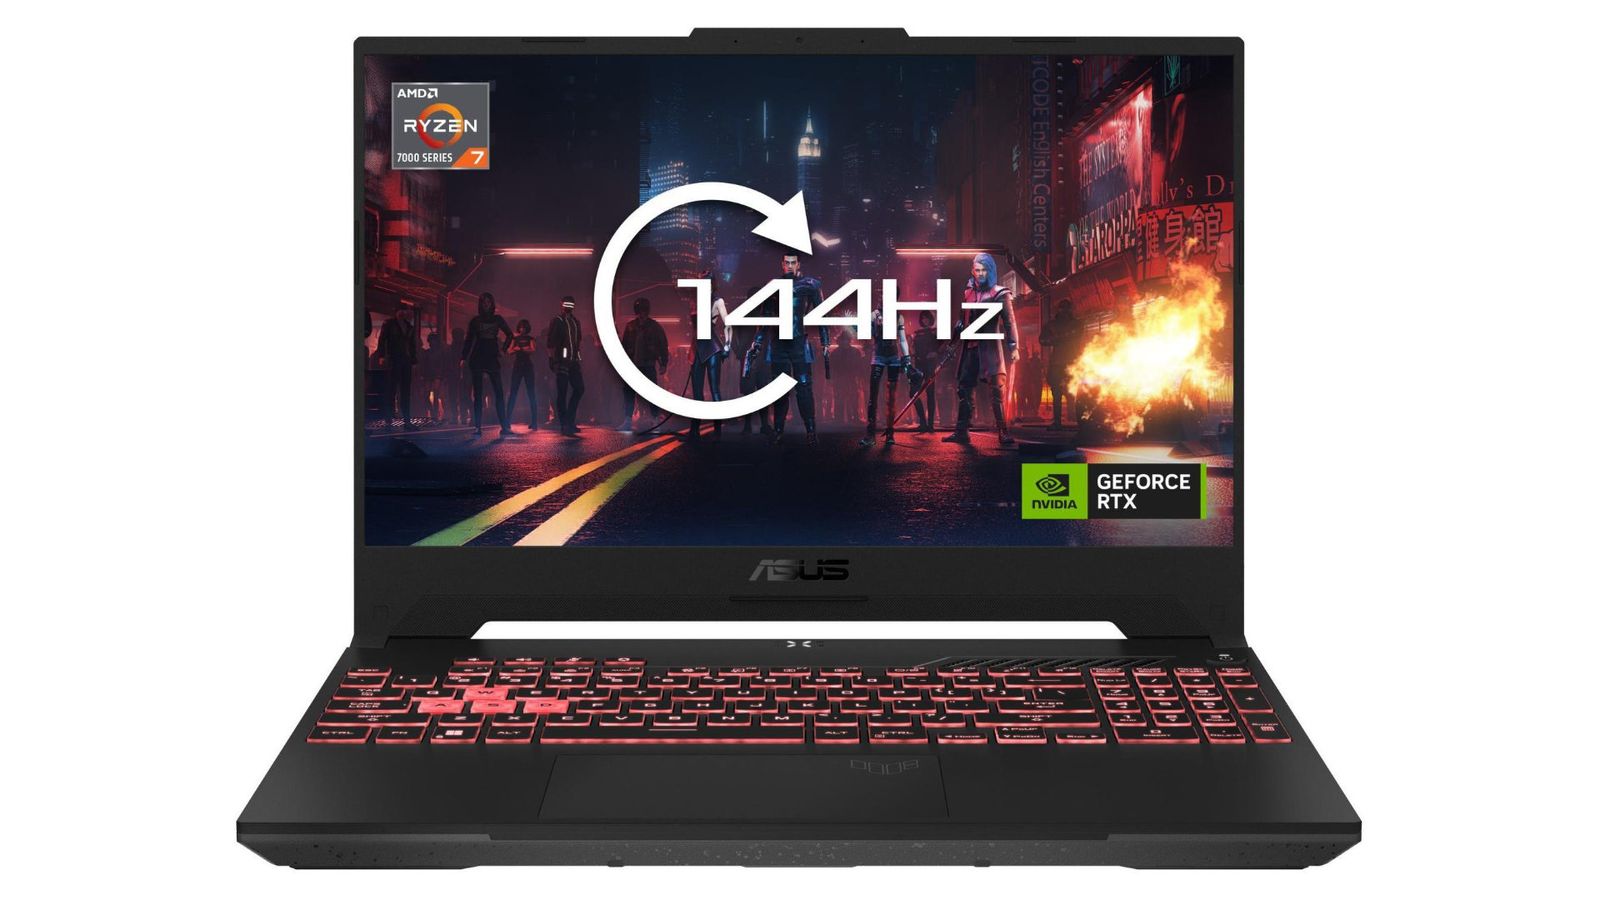 The Asus TUF Gaming A15 2023 gaming laptop with its screen open, advertising its 144Hz refresh rate.